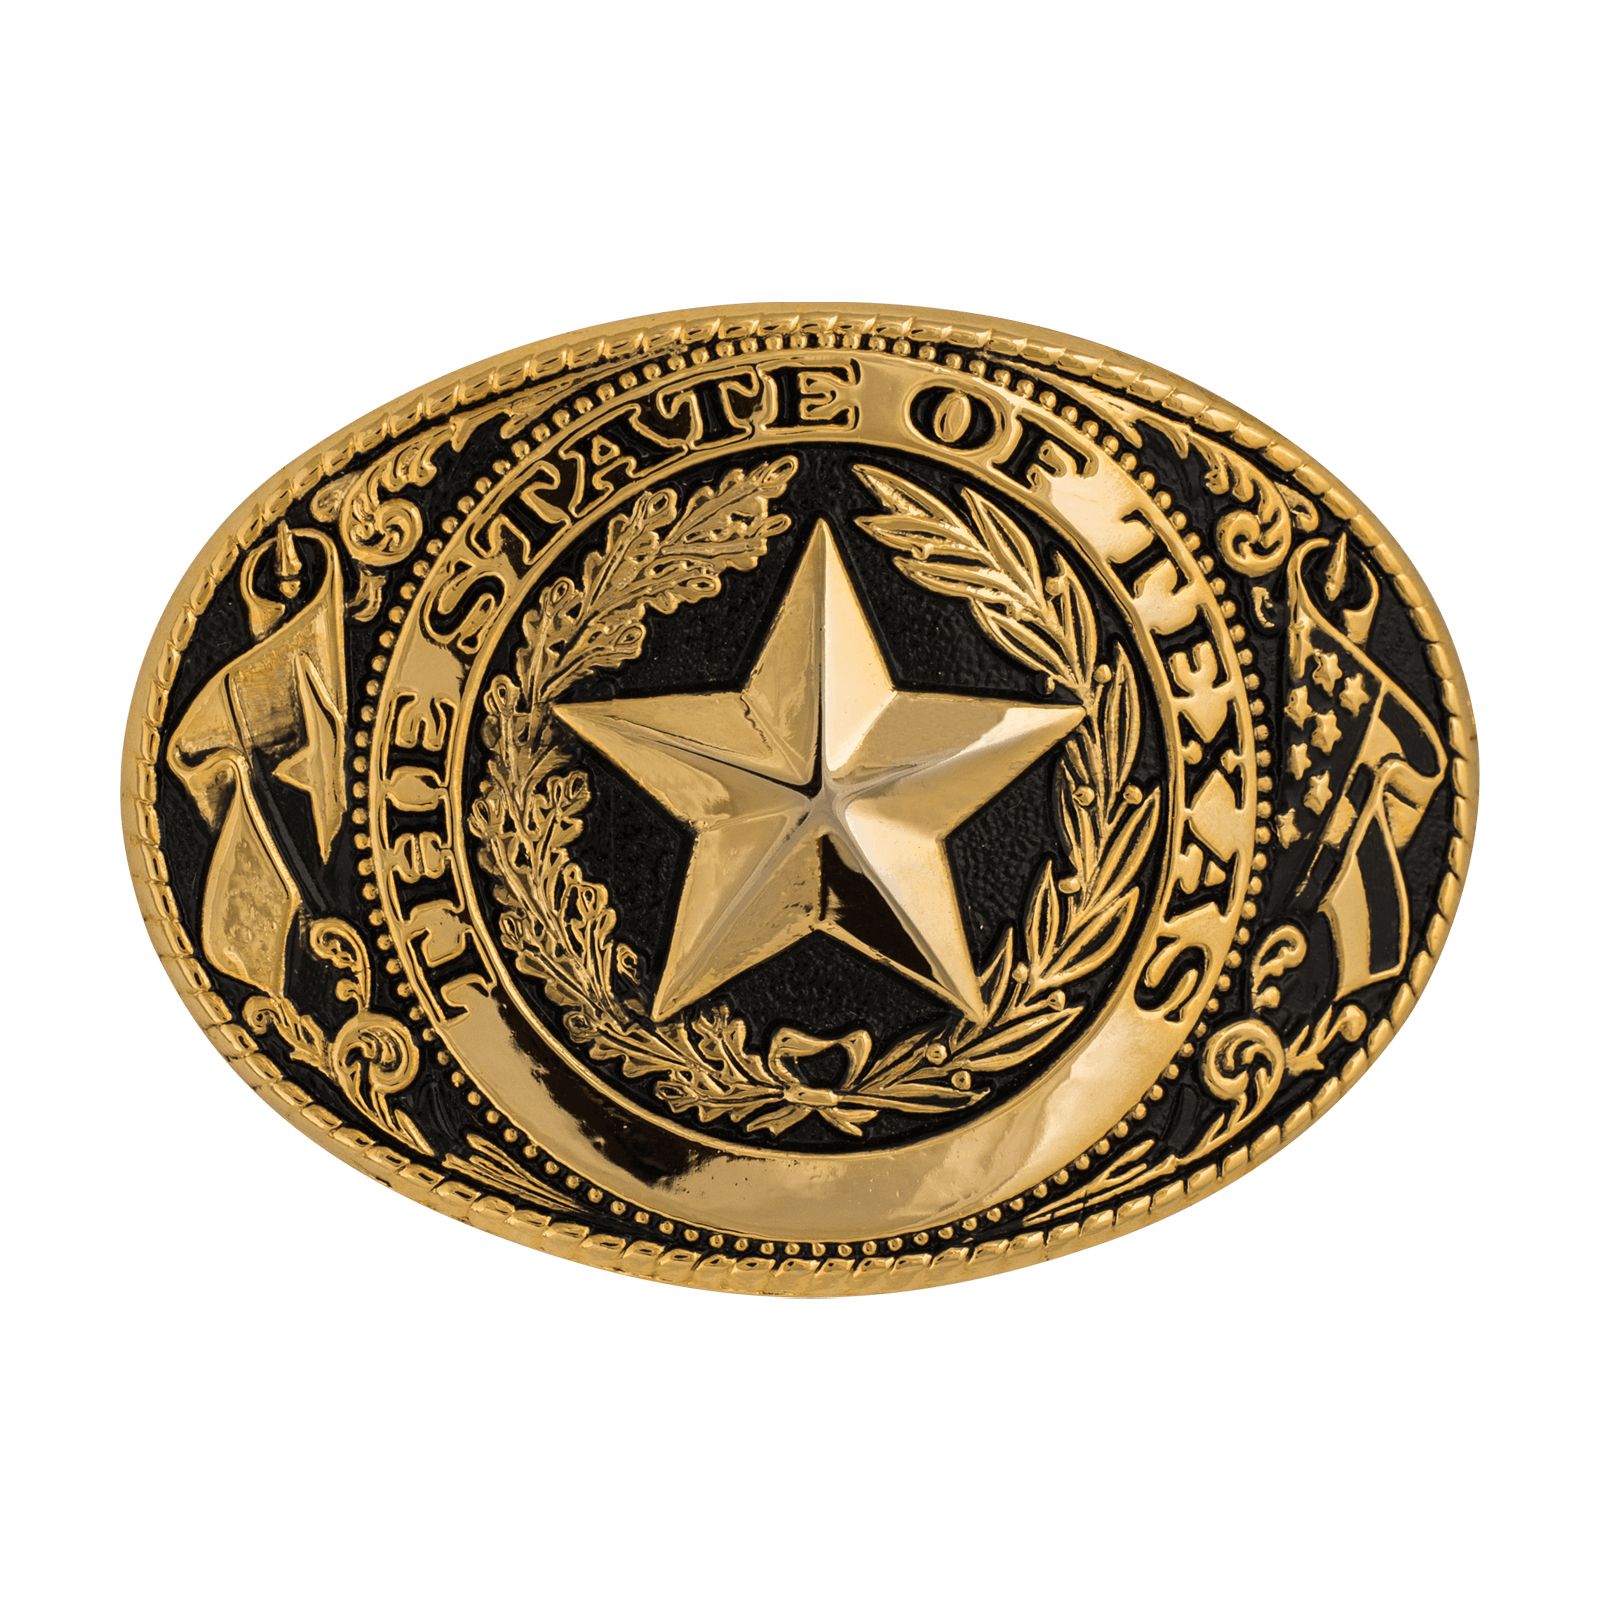 Texas State Seal Gold Tone and Black Belt Buckle | Bullock Museum Gift Shop